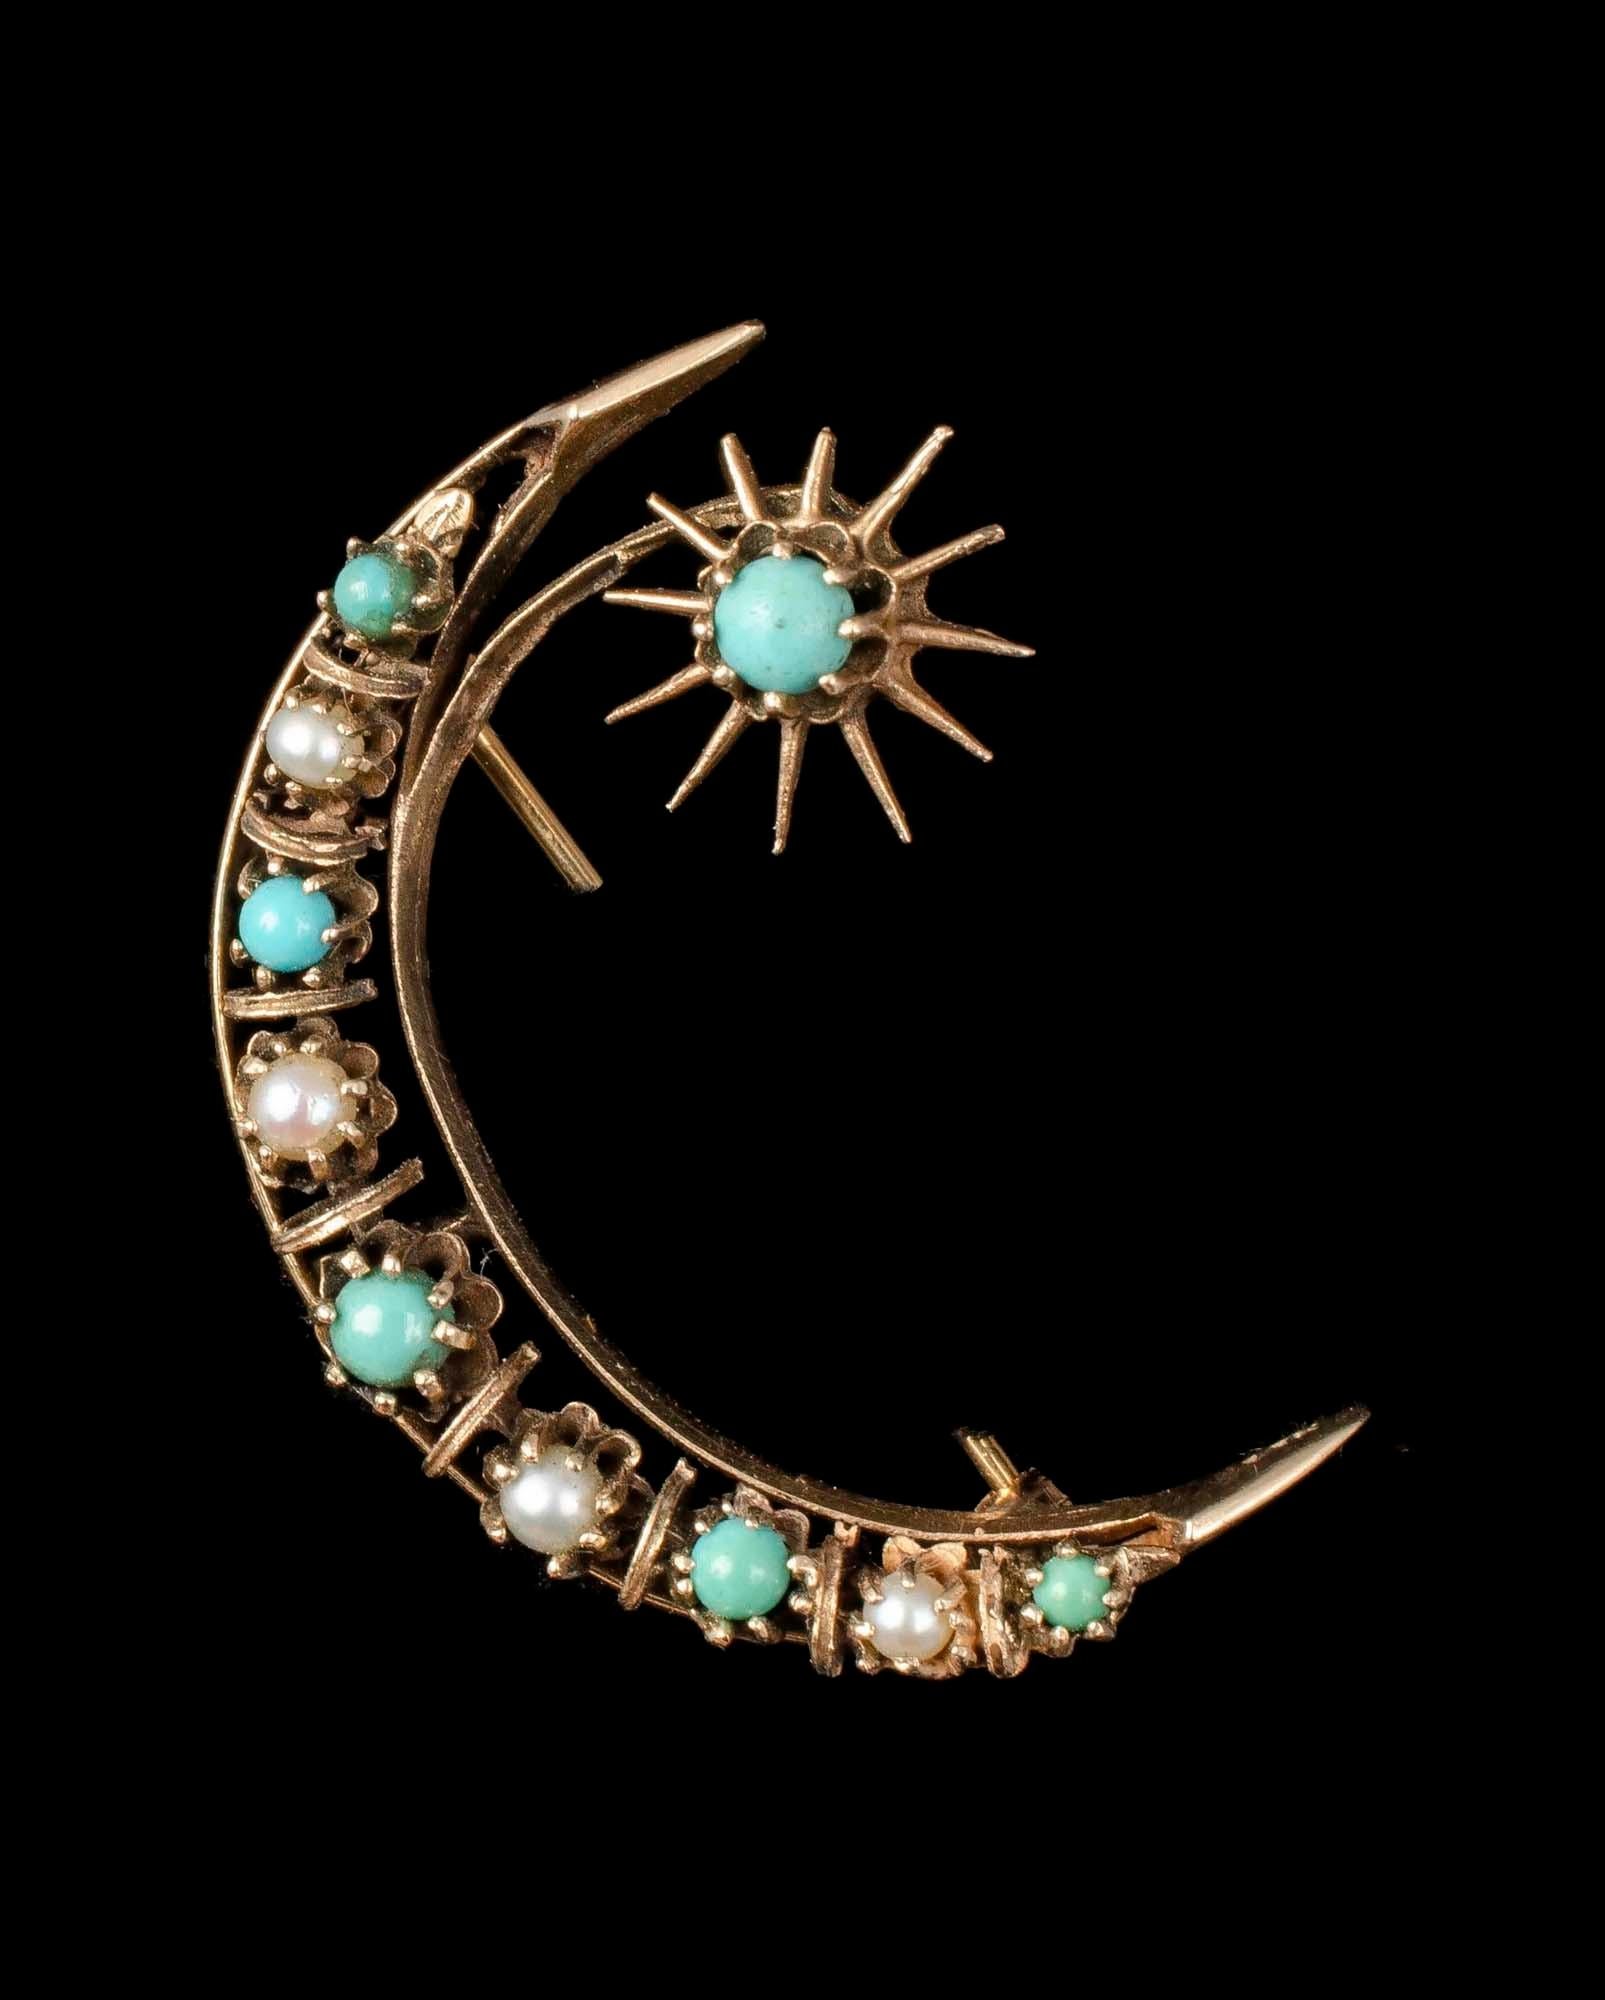 Cabochon 14k Gold Seed, Pearls, Turquoise Victorian Revival Crescent Moon Star Pin Brooch For Sale